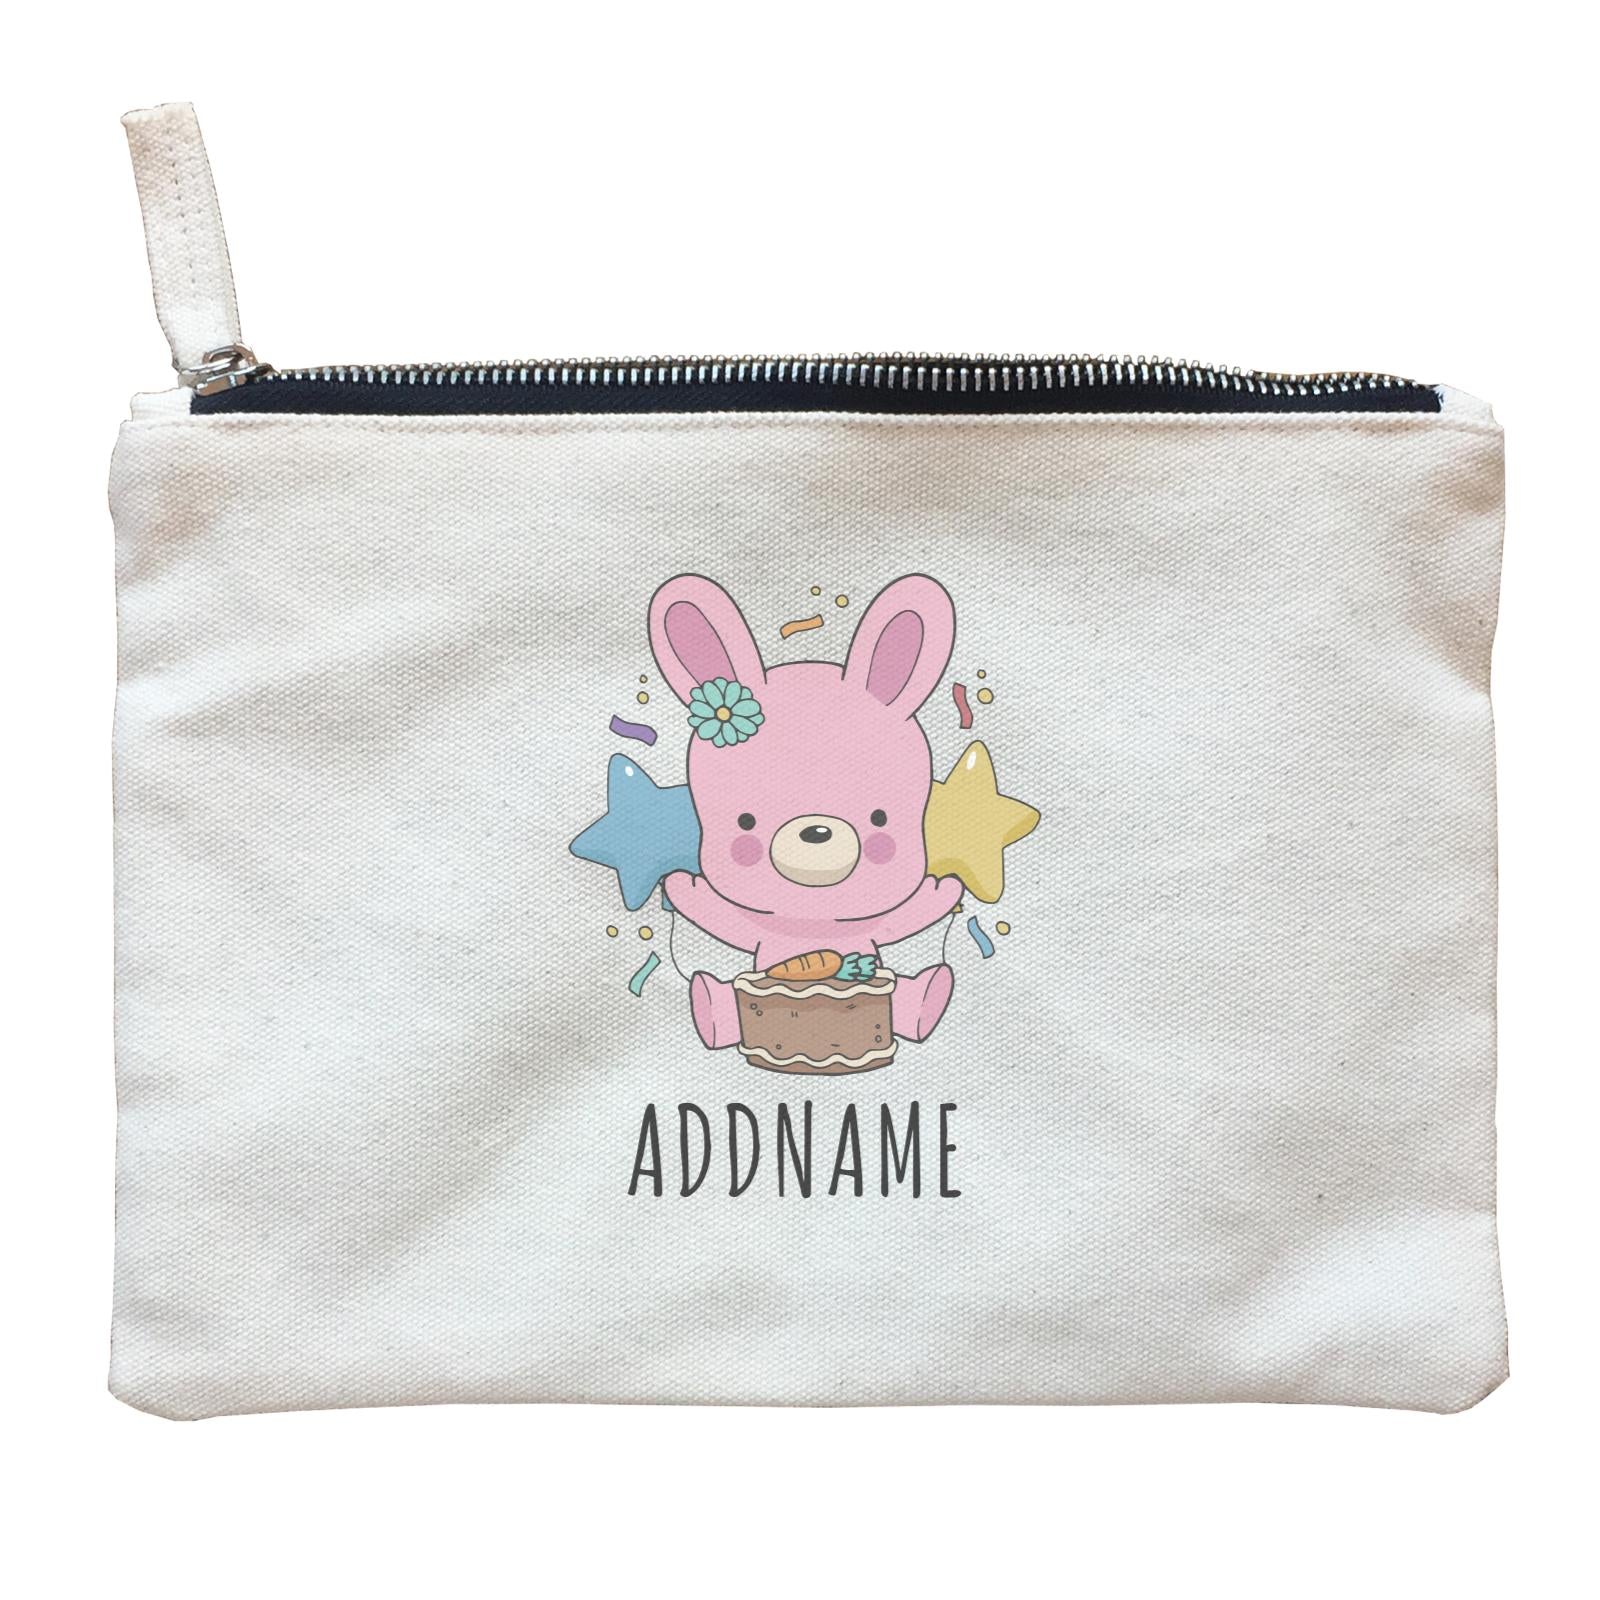 Birthday Sketch Animals Rabbit with Carrot Cake Addname Zipper Pouch